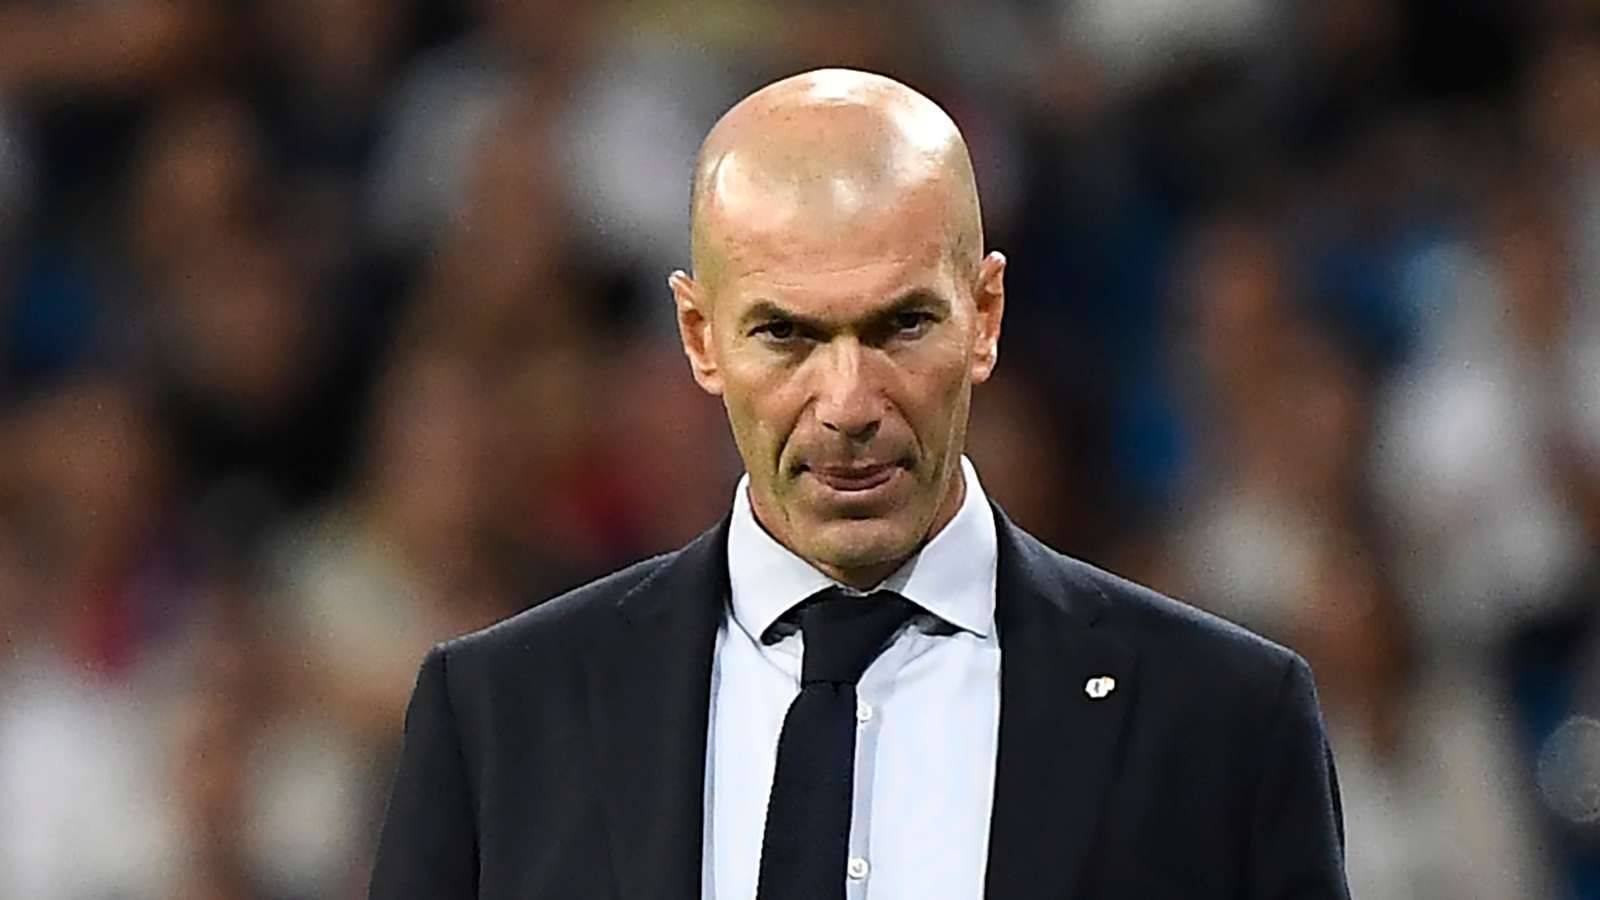 Real Madrid manager Zinedine Zidane gave a rallying call to his team